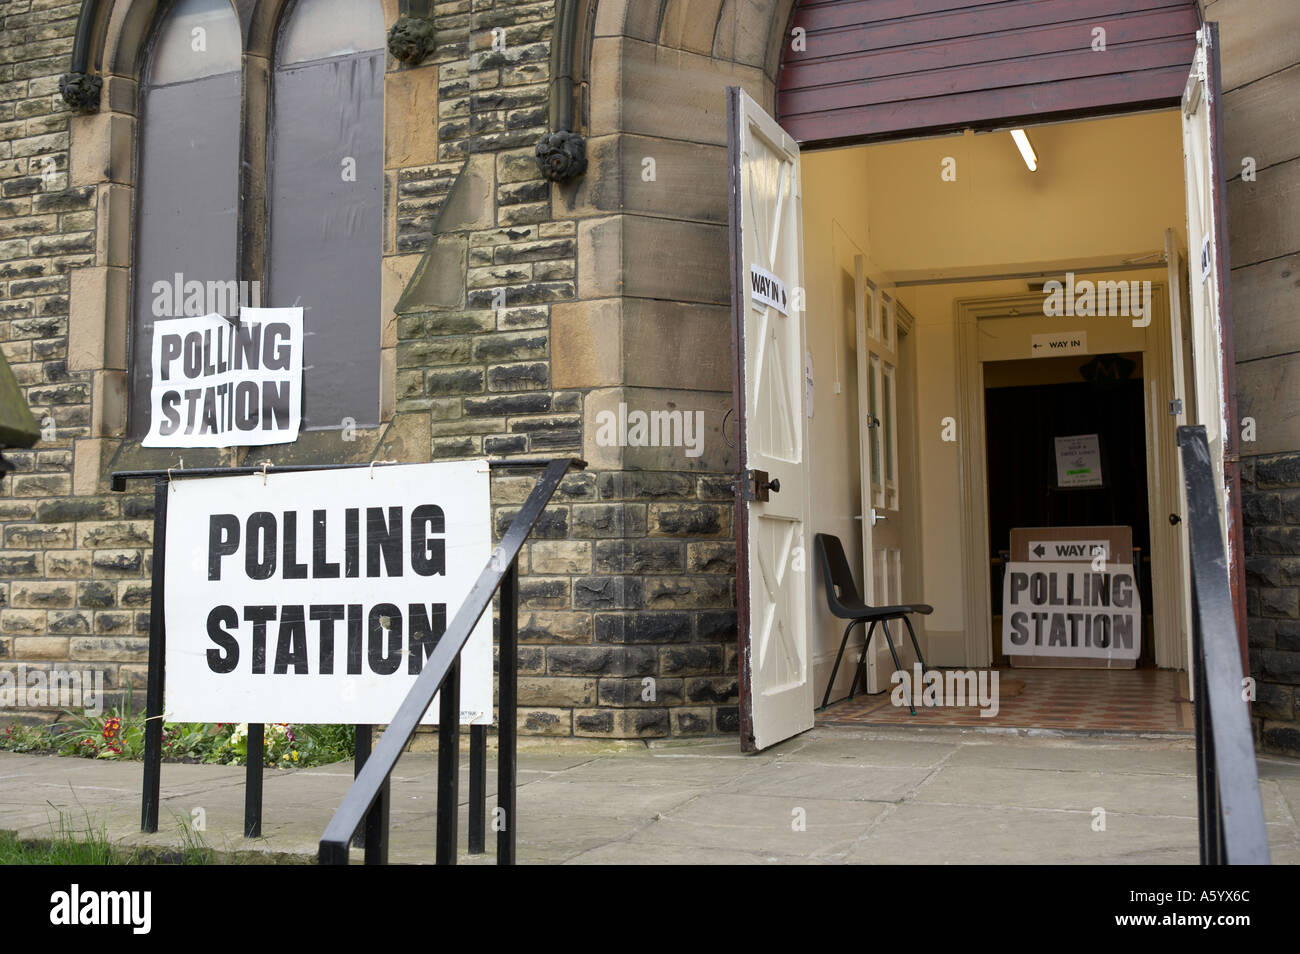 ENTRANCE TO POLLING STATION Stock Photo